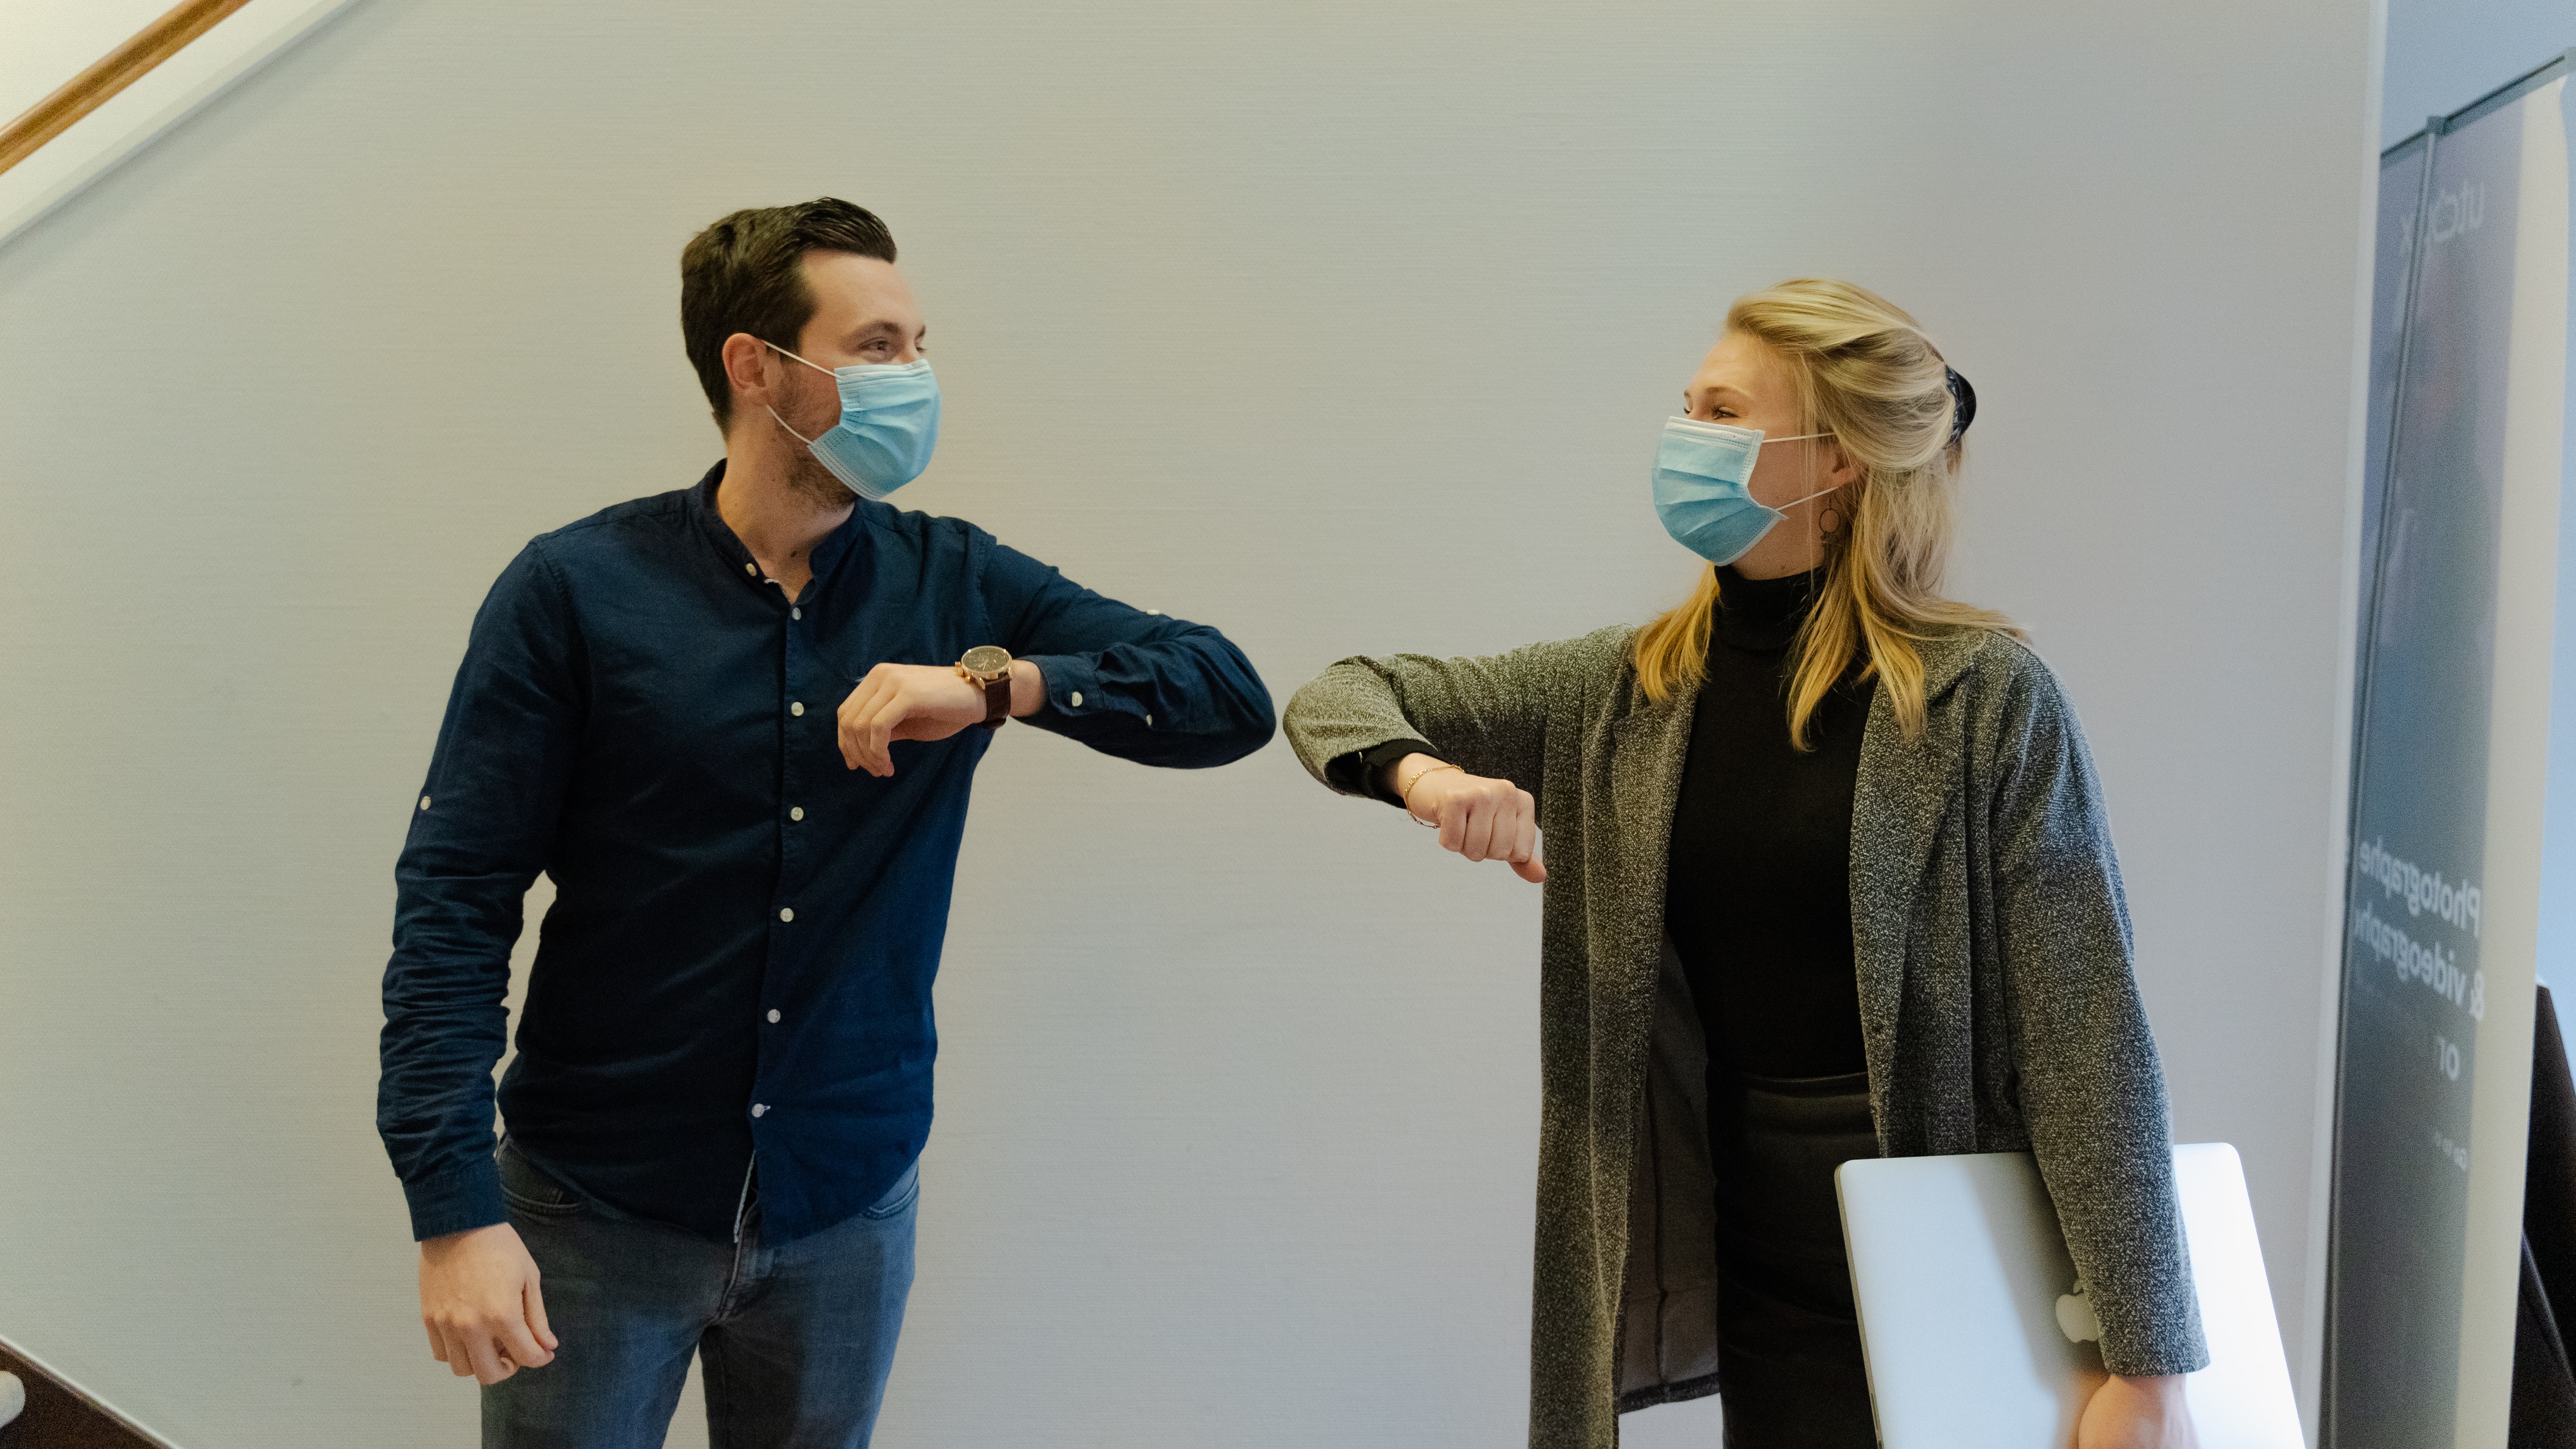 two people bumping elbows instead of shaking hands to reduce the spread of germs